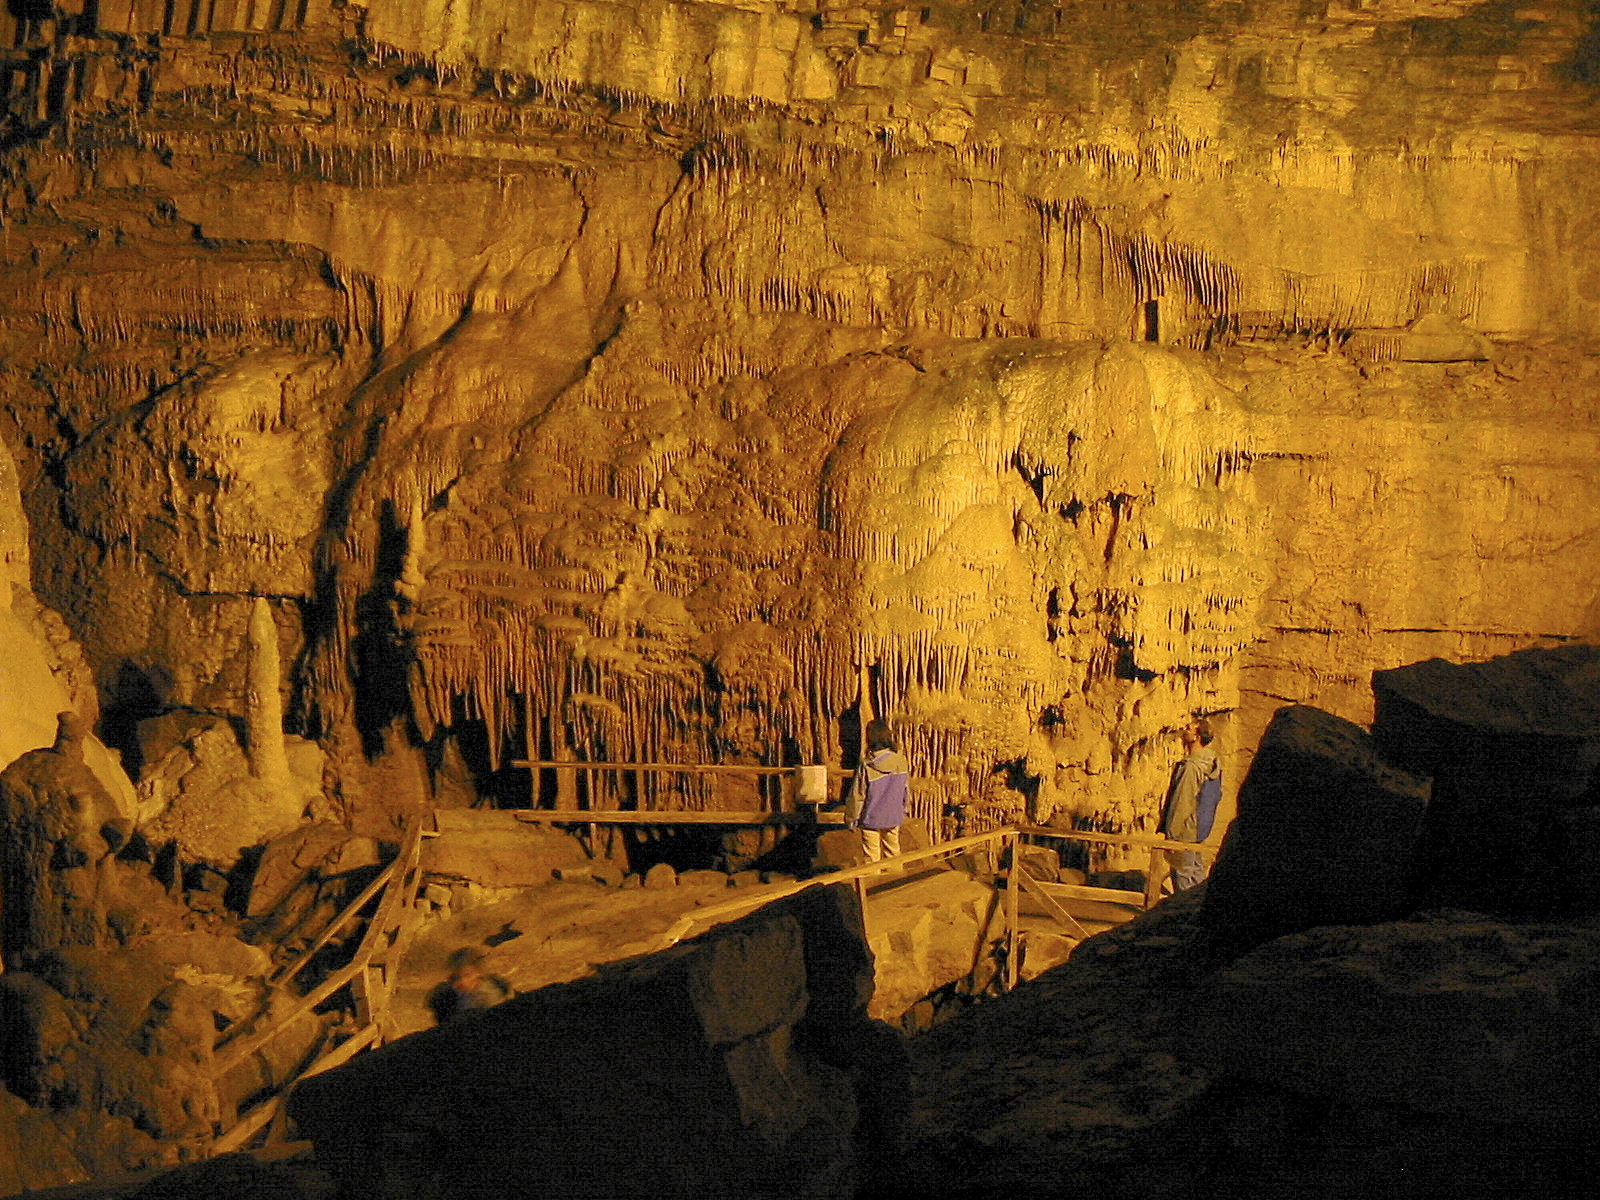 Two people observing the majestic rock formations at Lost World Caverns, one of the best attractions in West Virginia